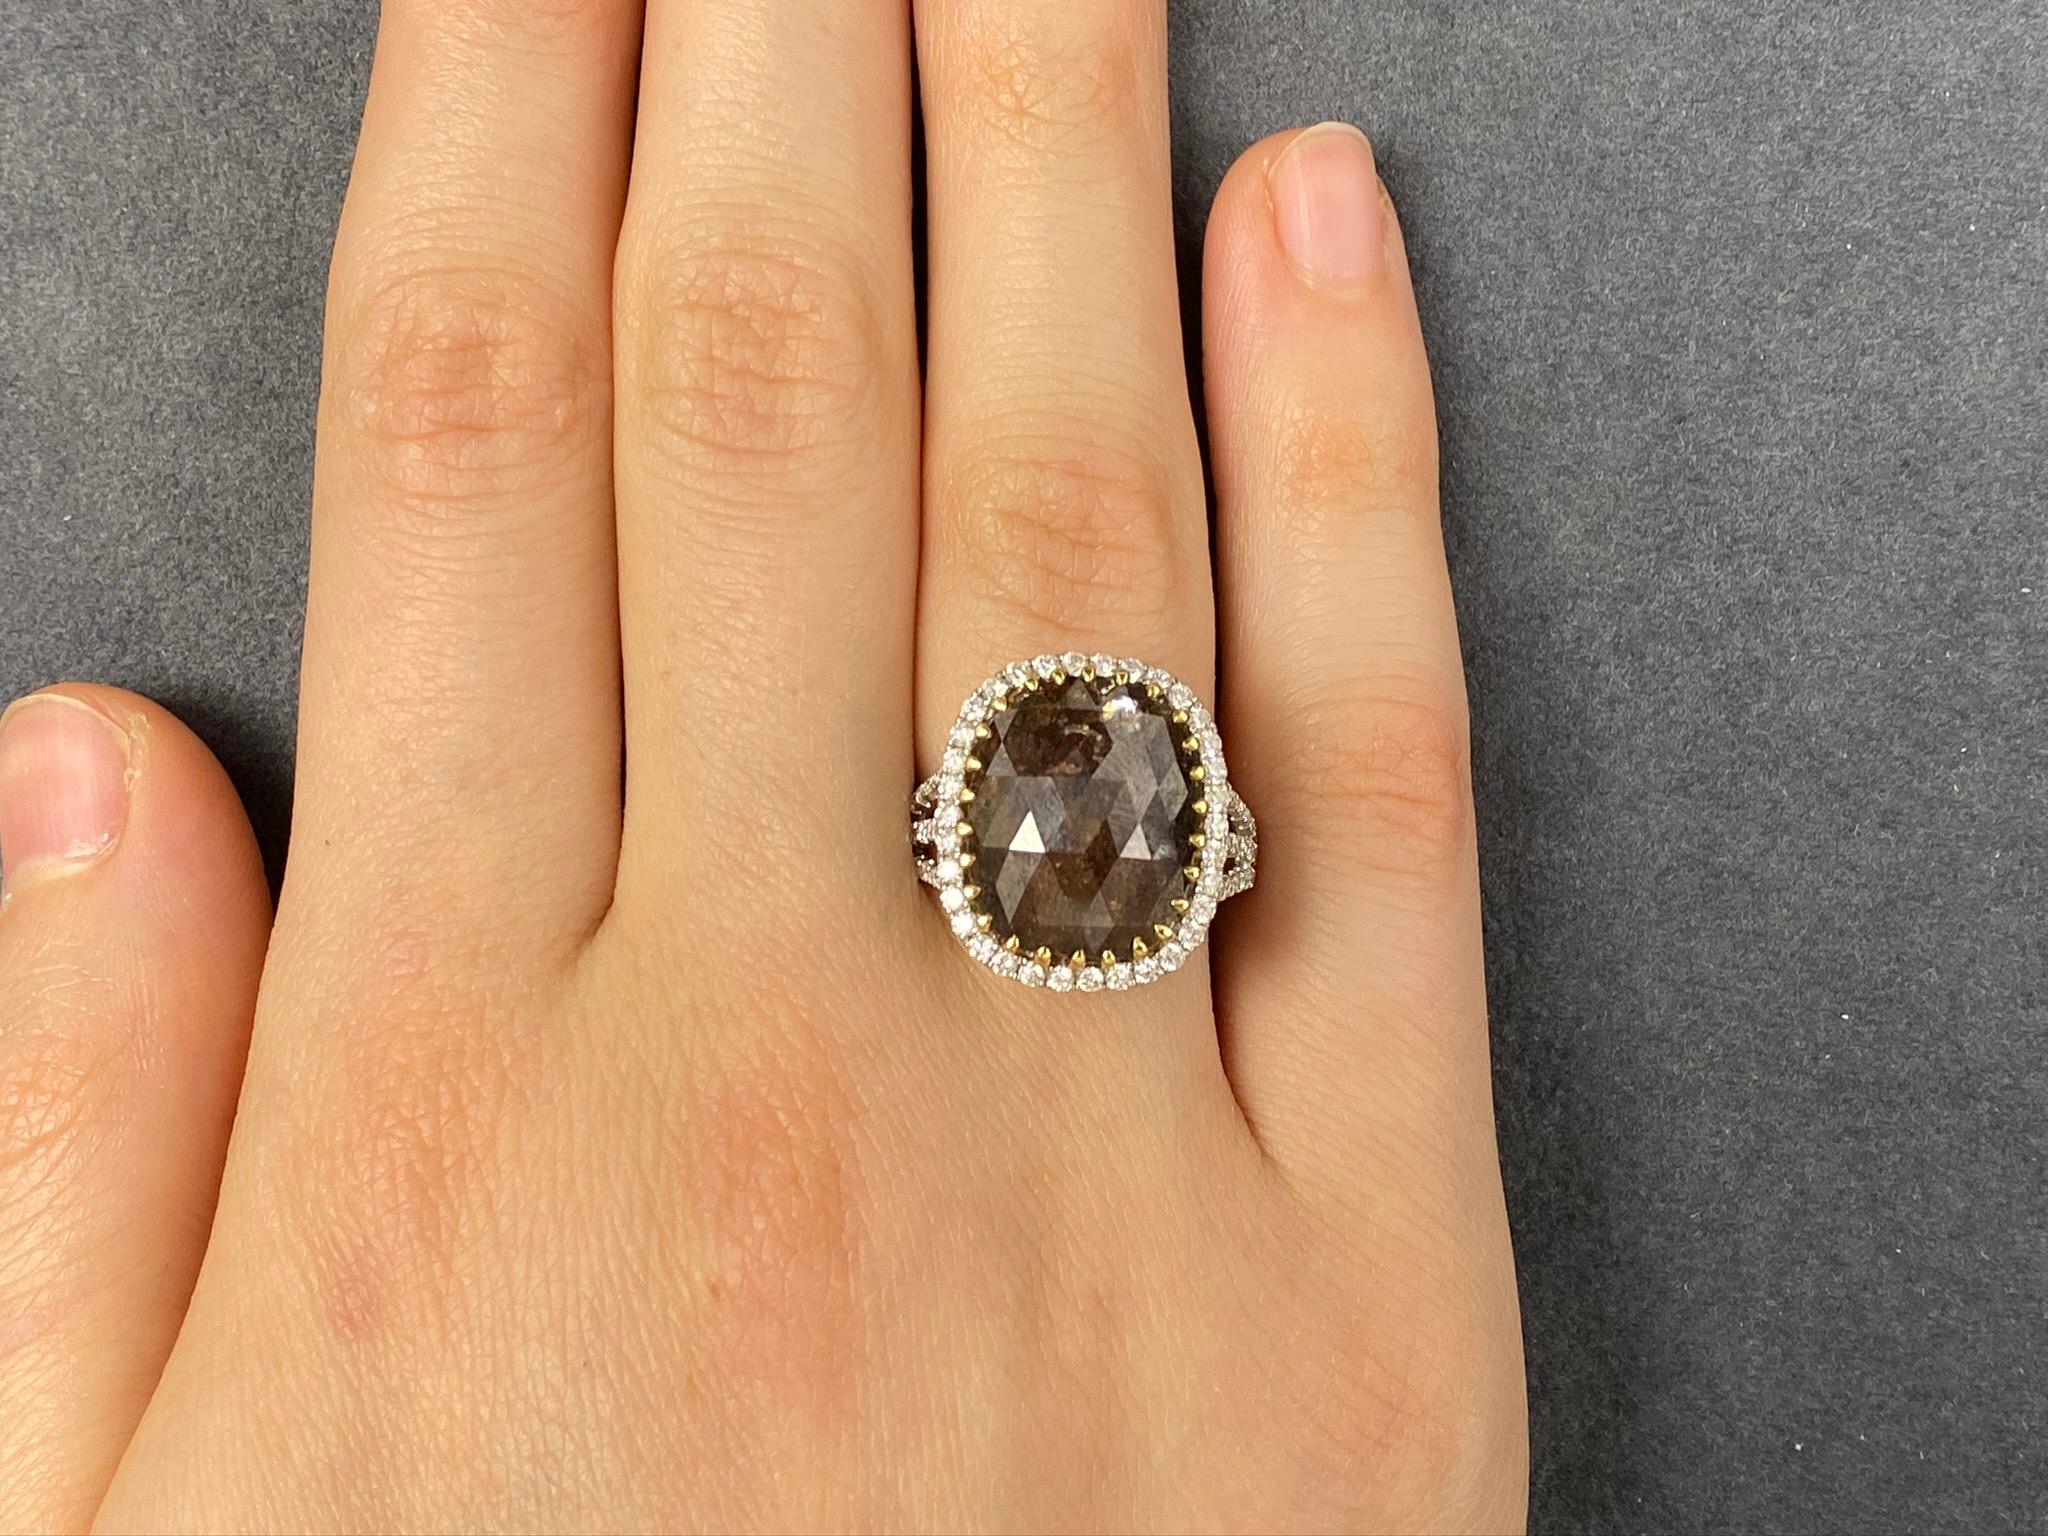 This stunning Cocktail Ring features a beautiful 7.39 Carat Rose Cut Cushion Brown Diamond, with a Diamond Halo. The Brown Diamond sits on a Triple Diamond Shank. This ring is set in 18K White Gold, with 18K Yellow Gold prongs on the center